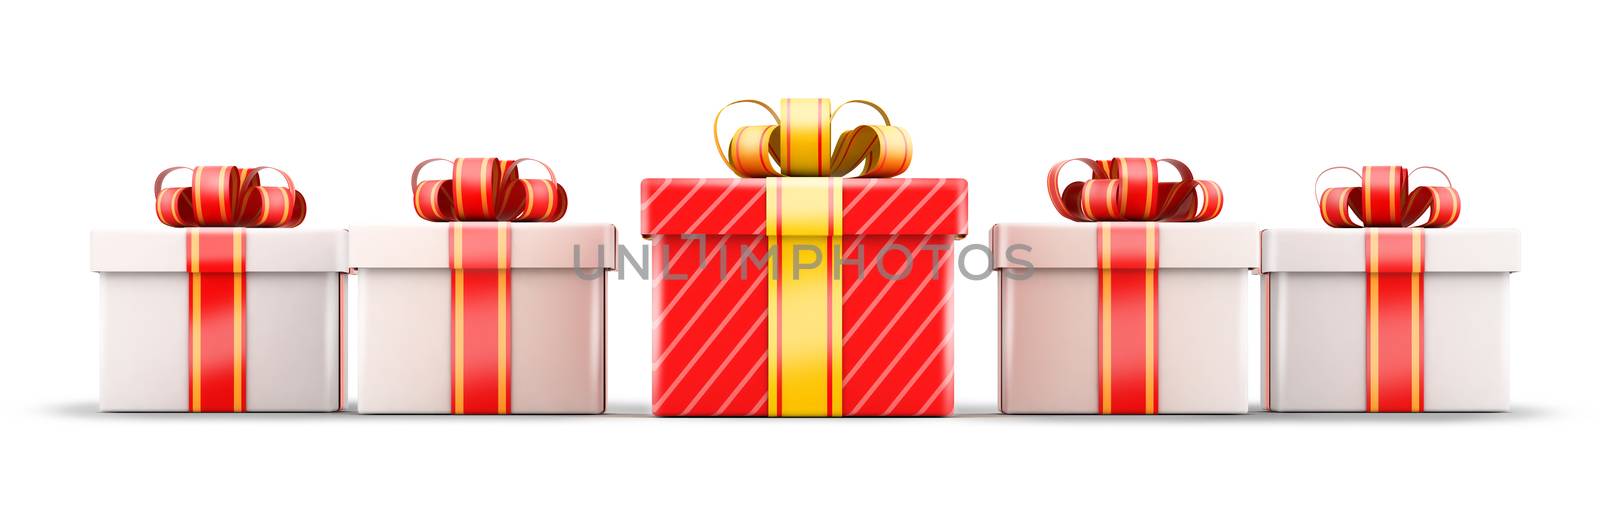 Five gift selection concept by iunewind